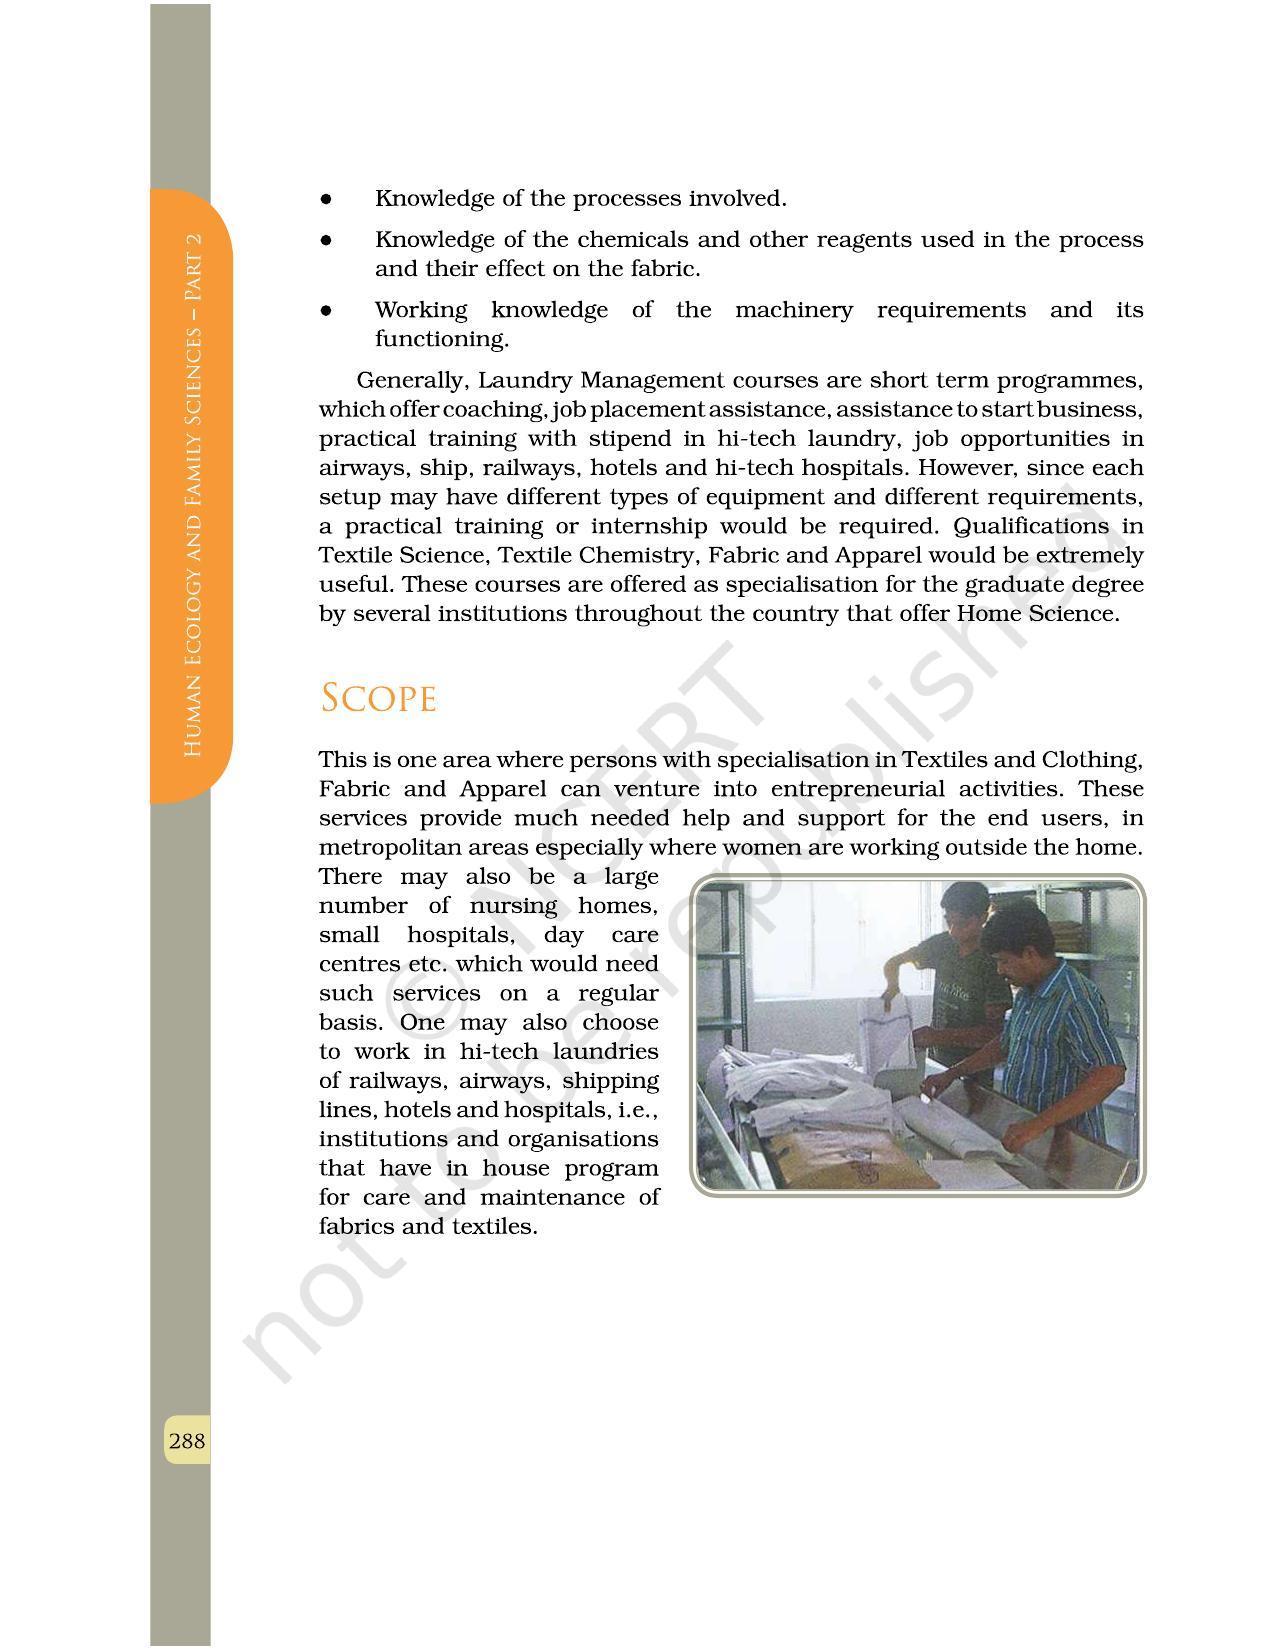 NCERT Book for Class 12 Home Science (Part -II) Chapter 15 Care and Maintenance of Fabrics in Institutions - Page 10